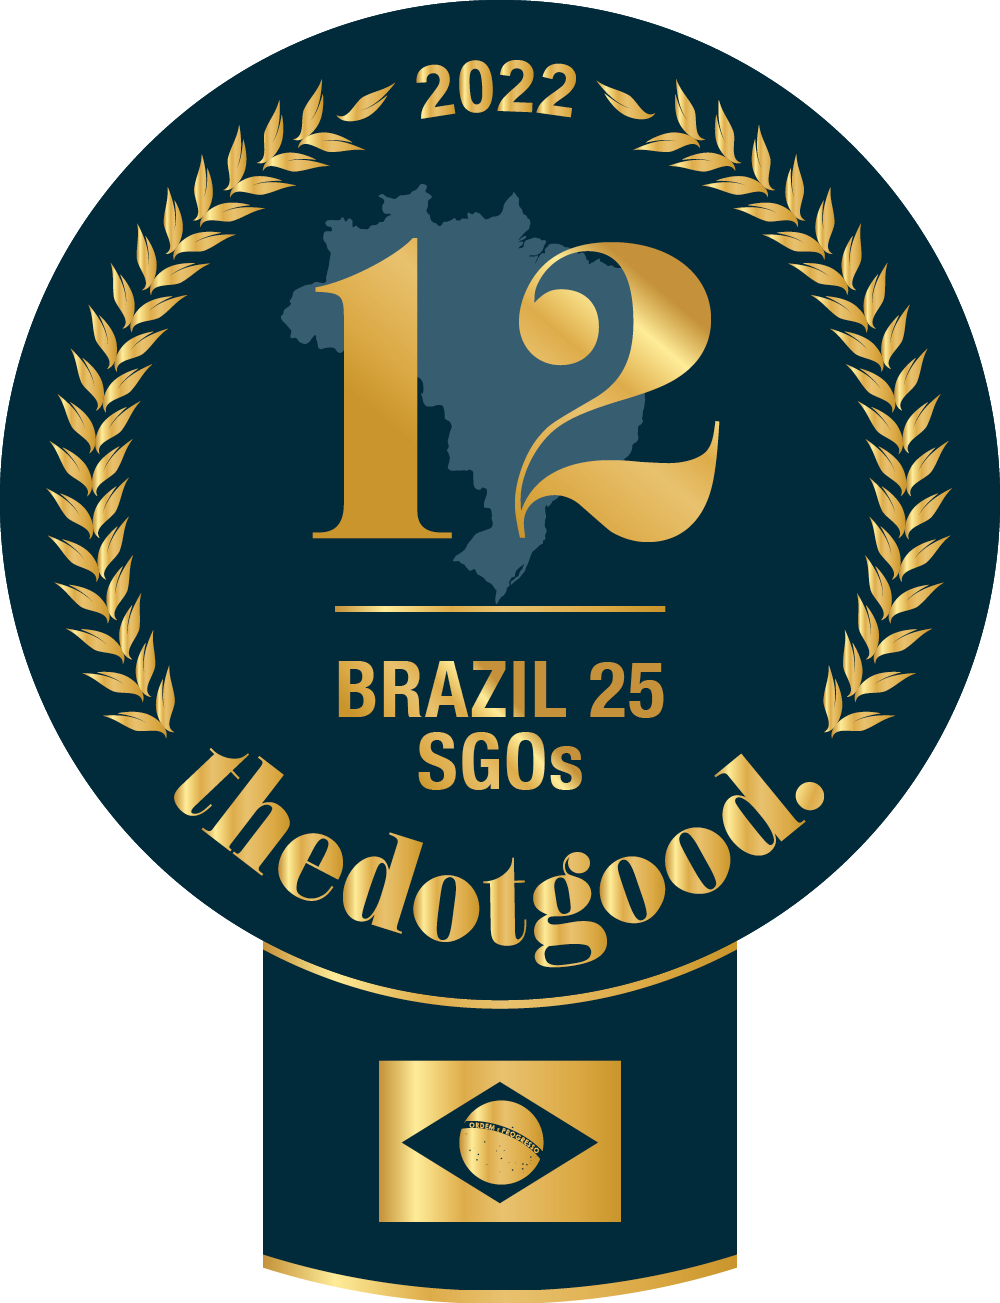 RAMACRISNA INSTITUTE is brazil ranked on thedotgood.